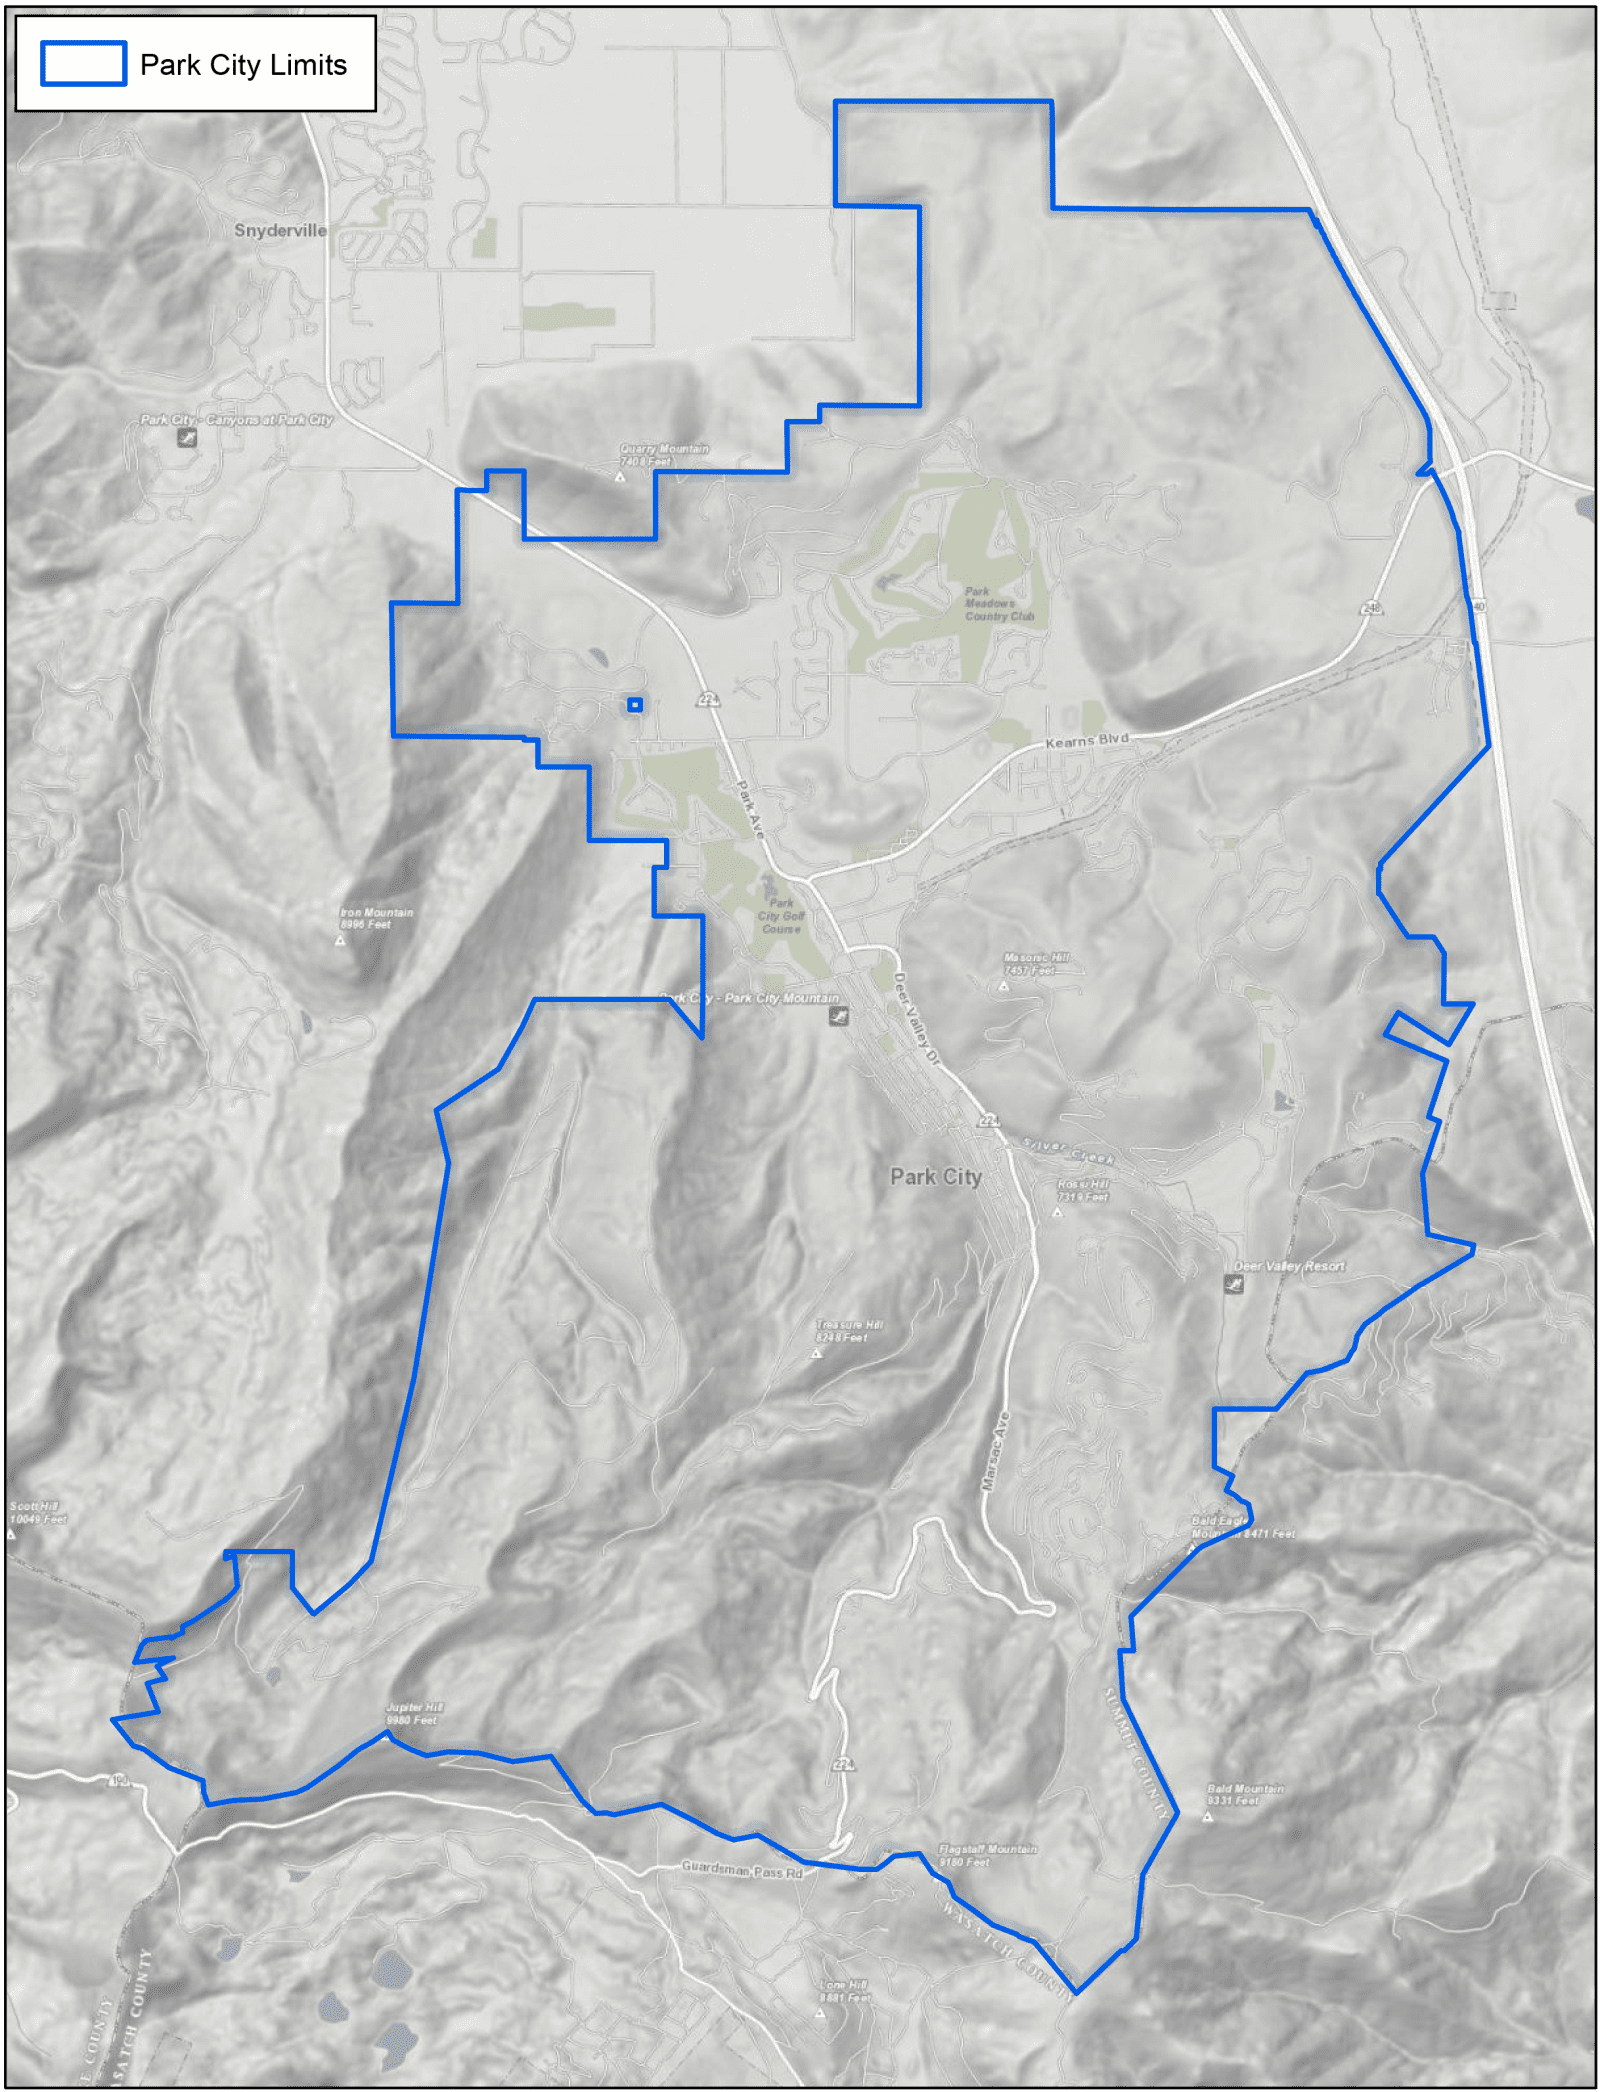 Park City limits, including the recently annexed area.